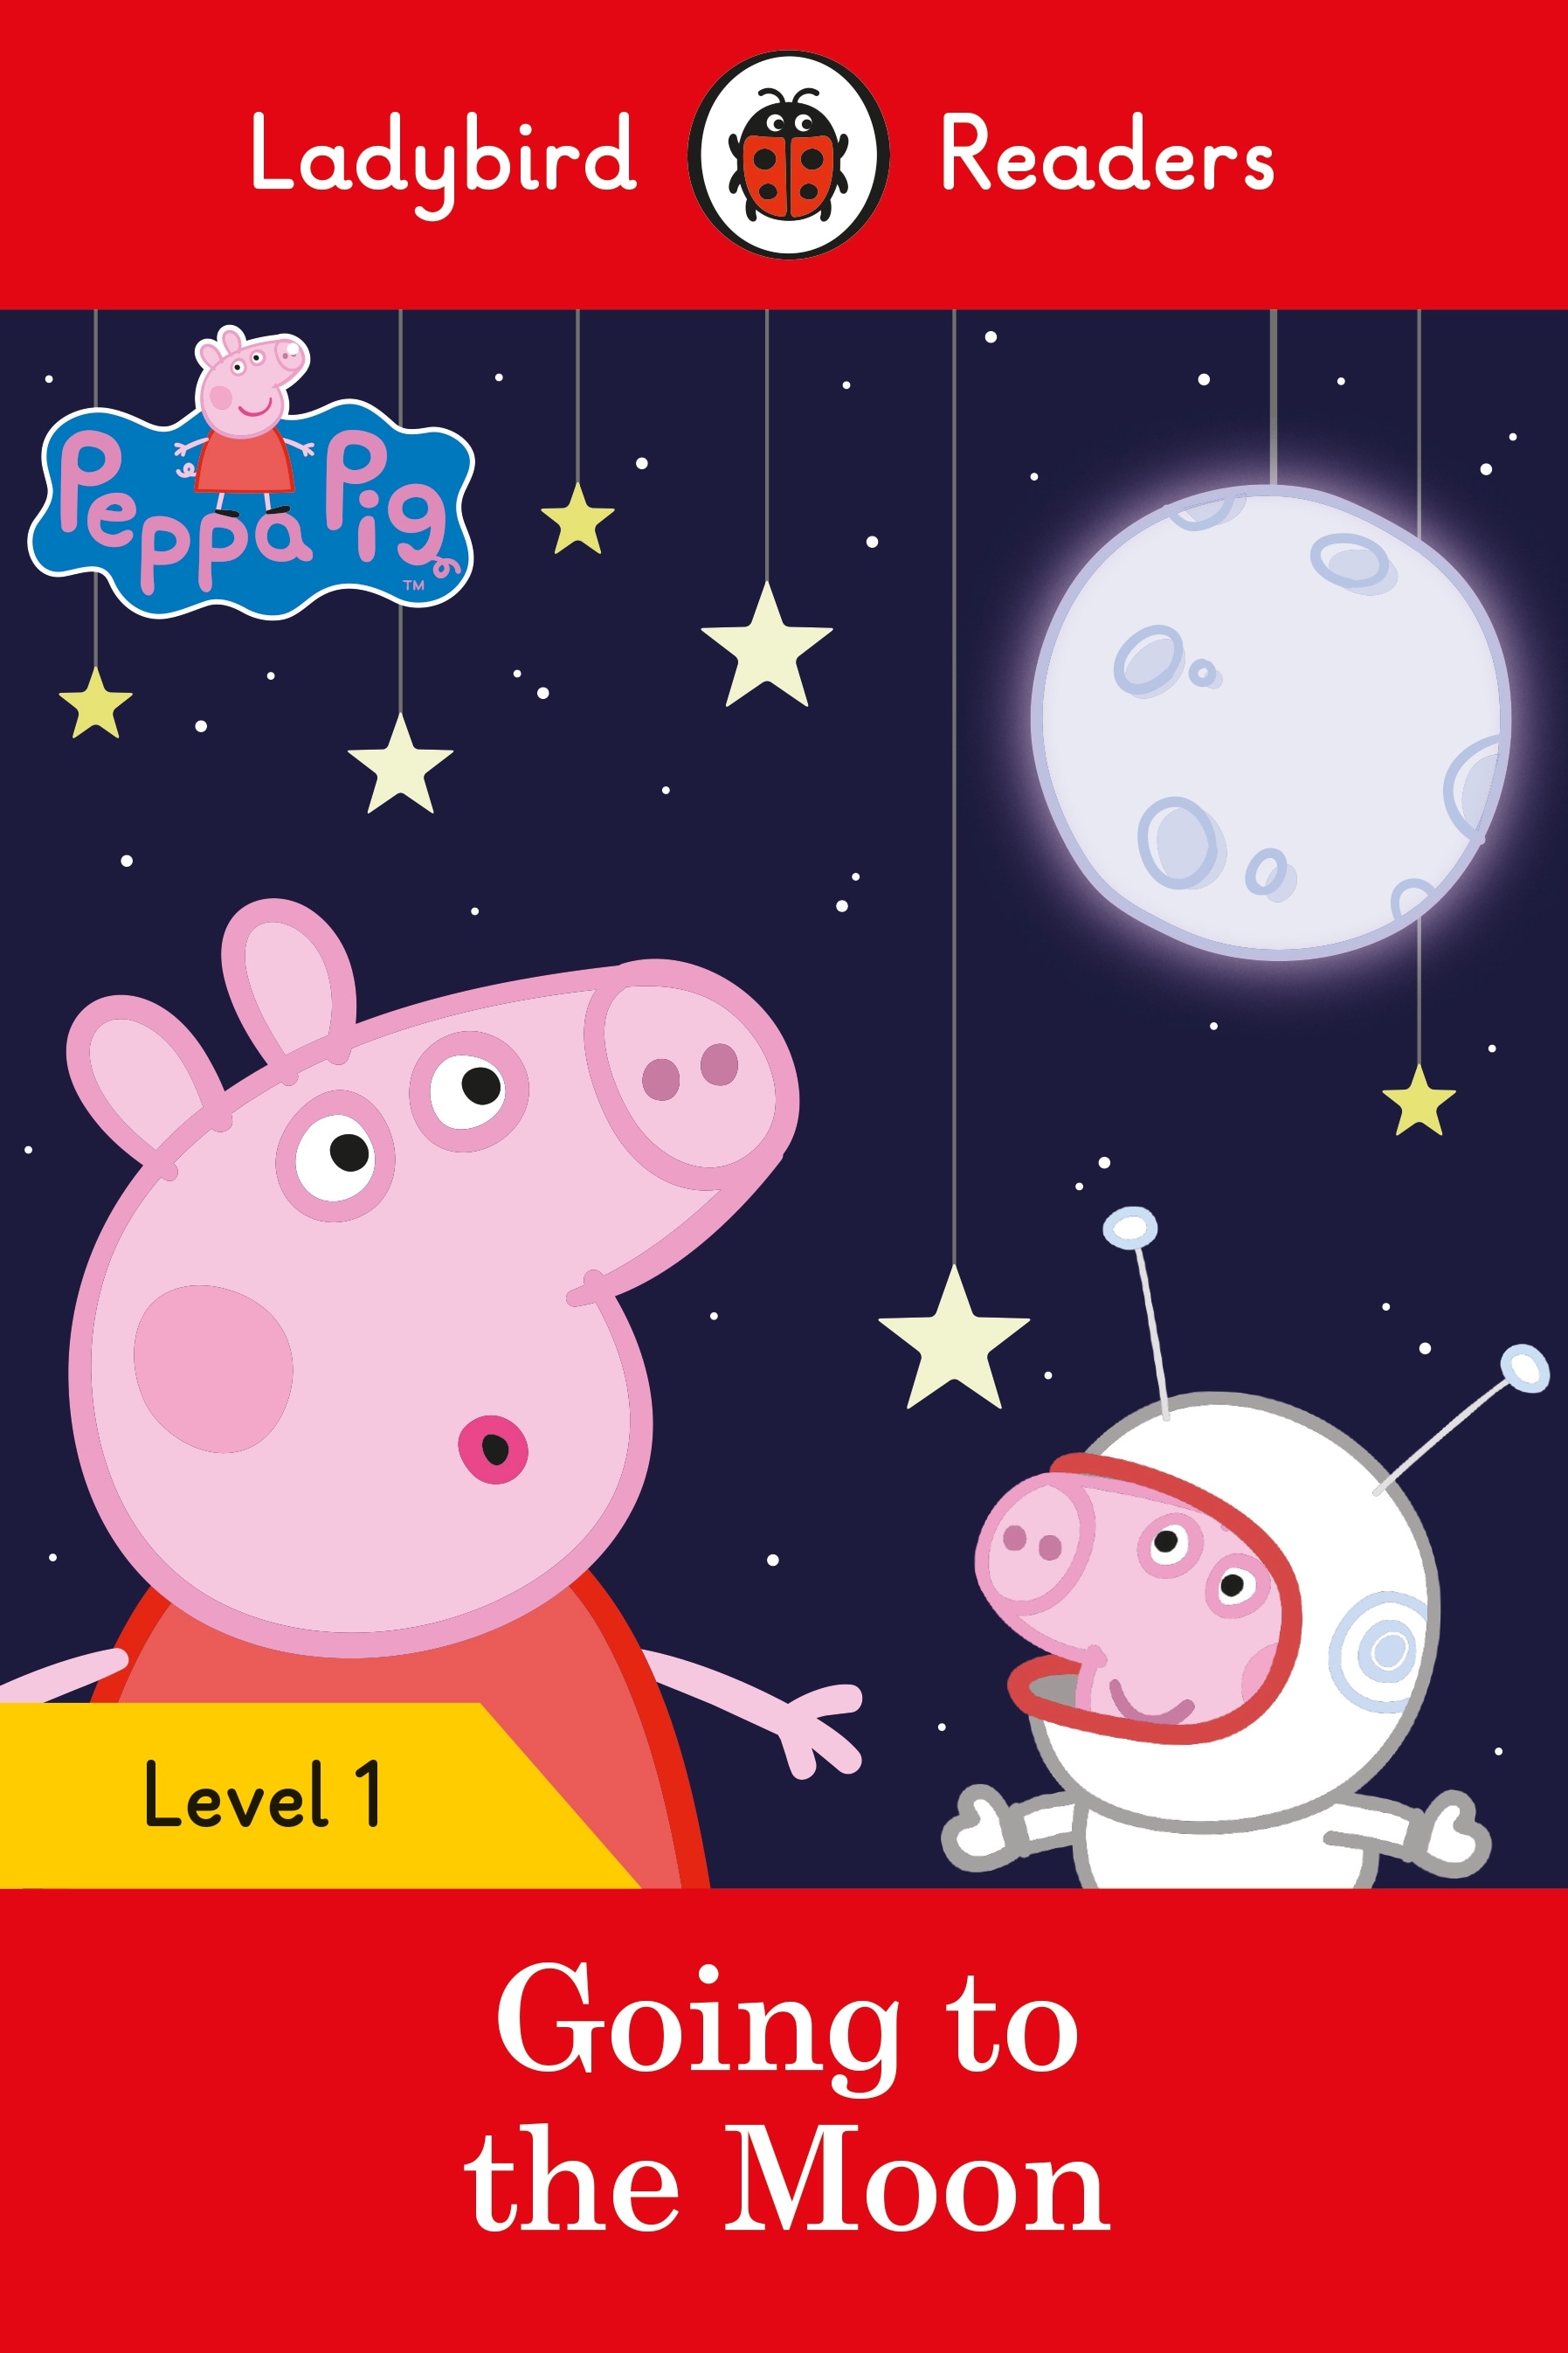 Book “Peppa Pig Going to the Moon - Ladybird Readers Level 1” by Ladybird, Peppa Pig — January 31, 2019